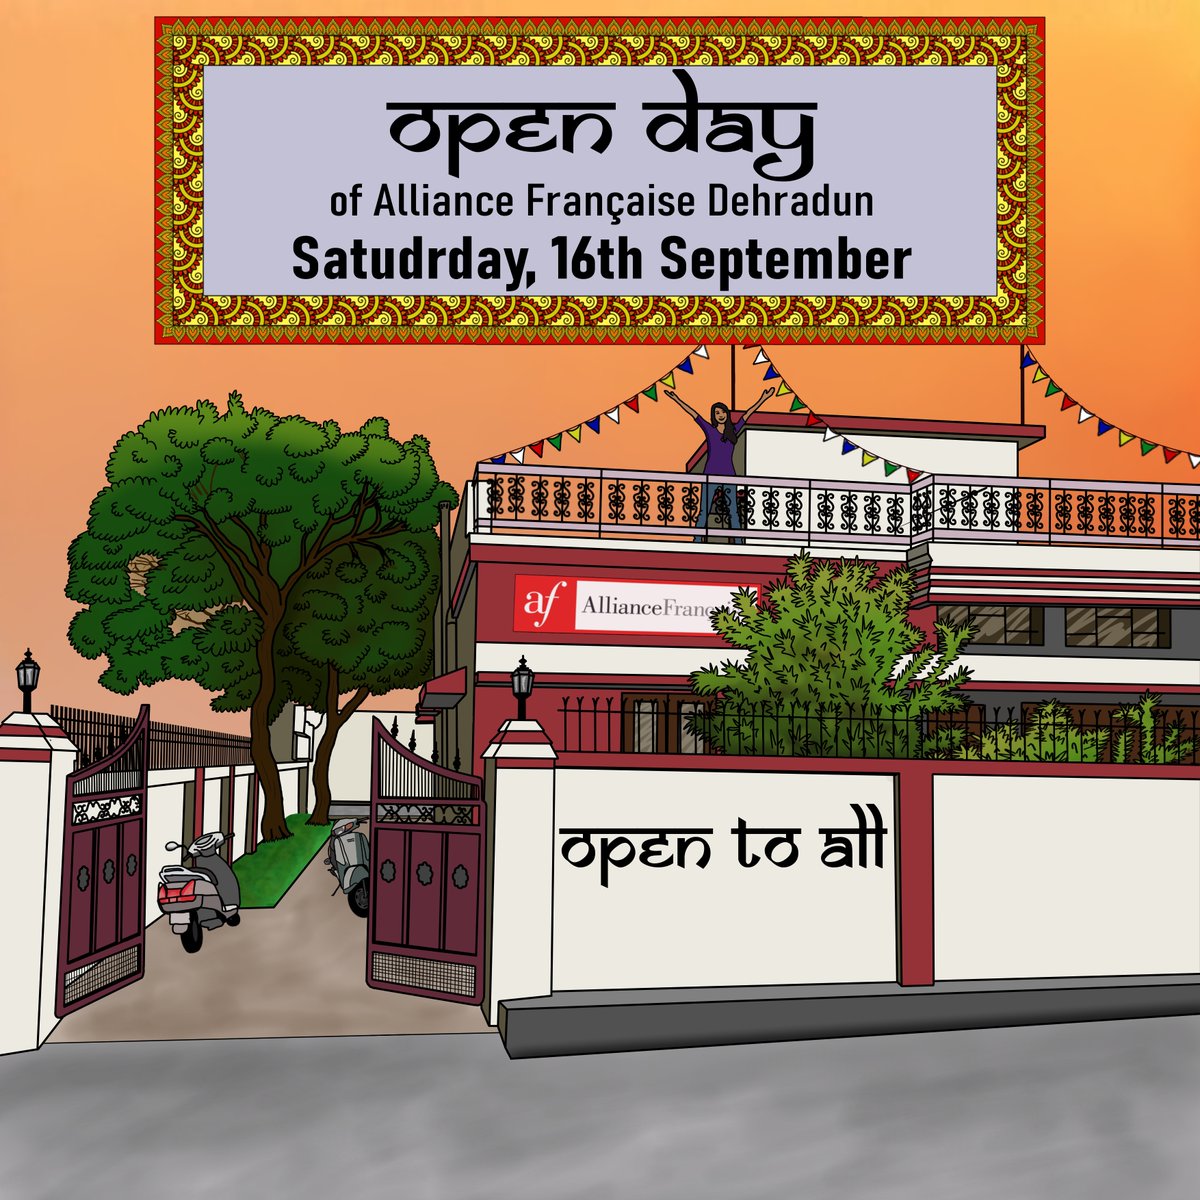 Saturday, 16th September we are organising a OPEN DAY 🎉
- 10am → Making crêpes workshop
- 10am → Demo class, interested→ fill in this form: bit.ly/3JYf1PR
- 12pm → Board games
- 2:30pm → Demo class 2
- 4:30pm → Café conversation
- 6:30pm → Live music and art